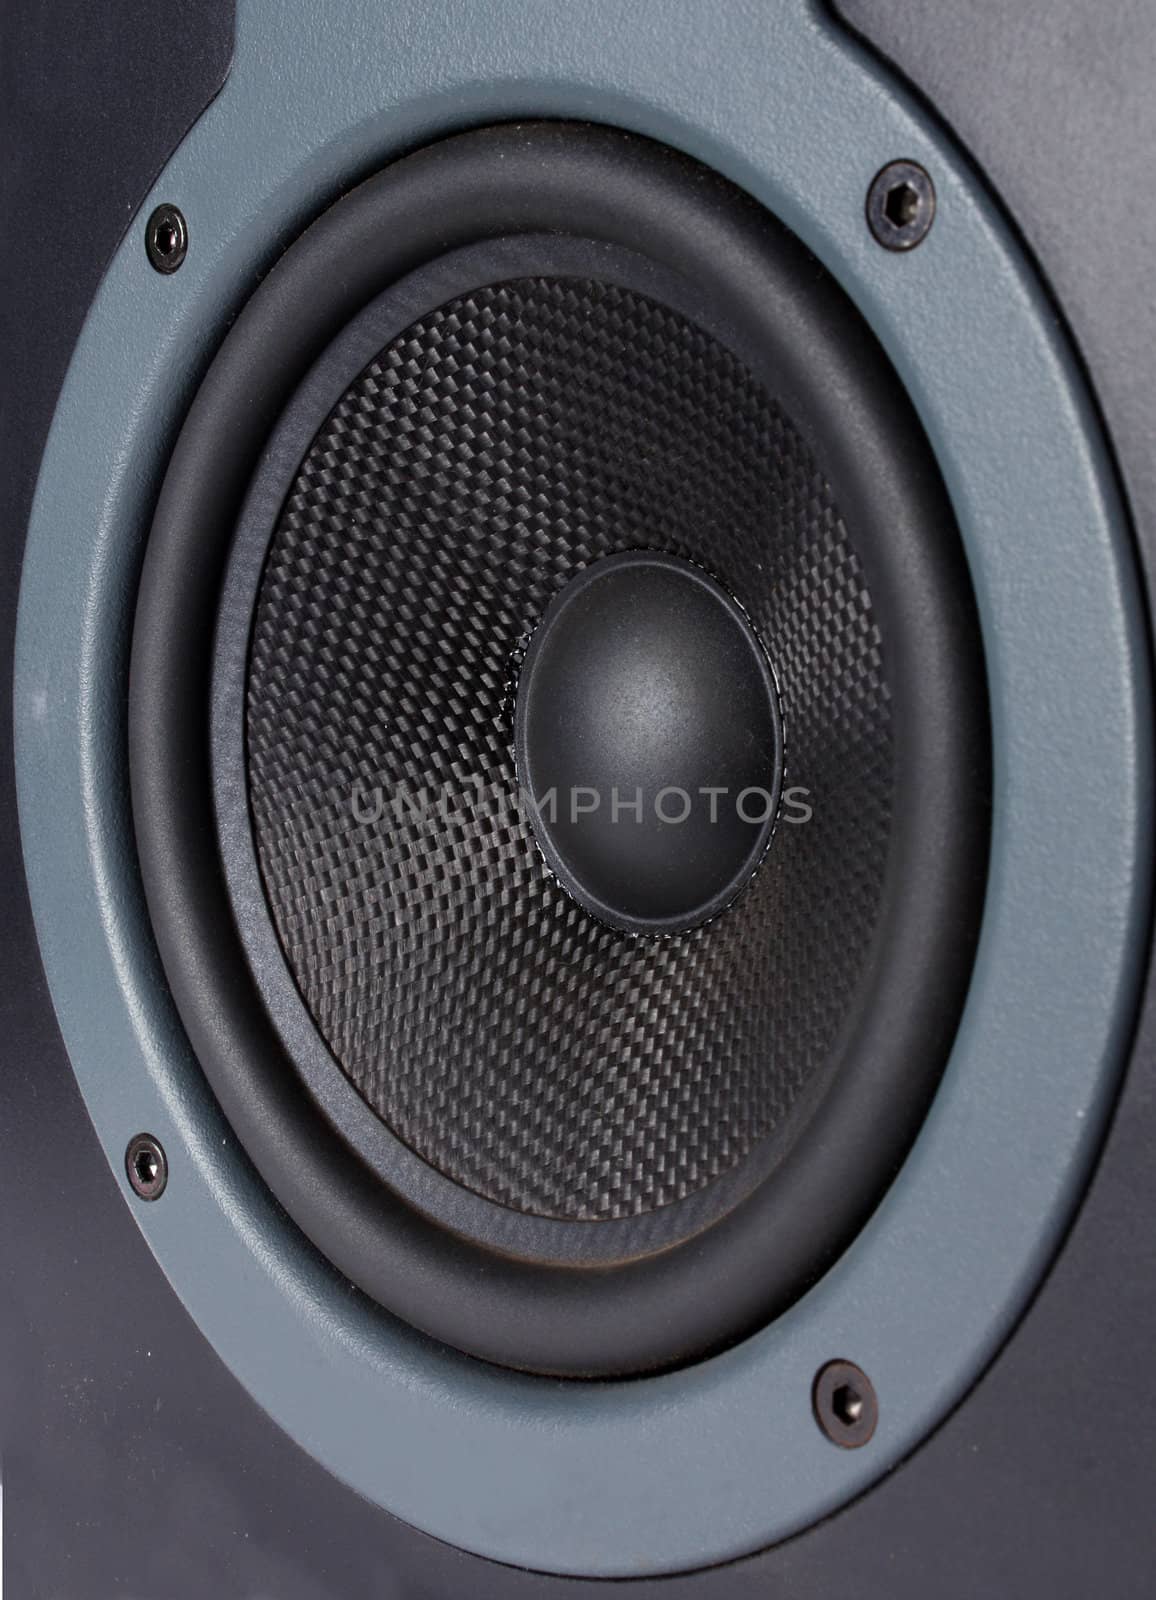 A closeup view of the woofer of a speaker.